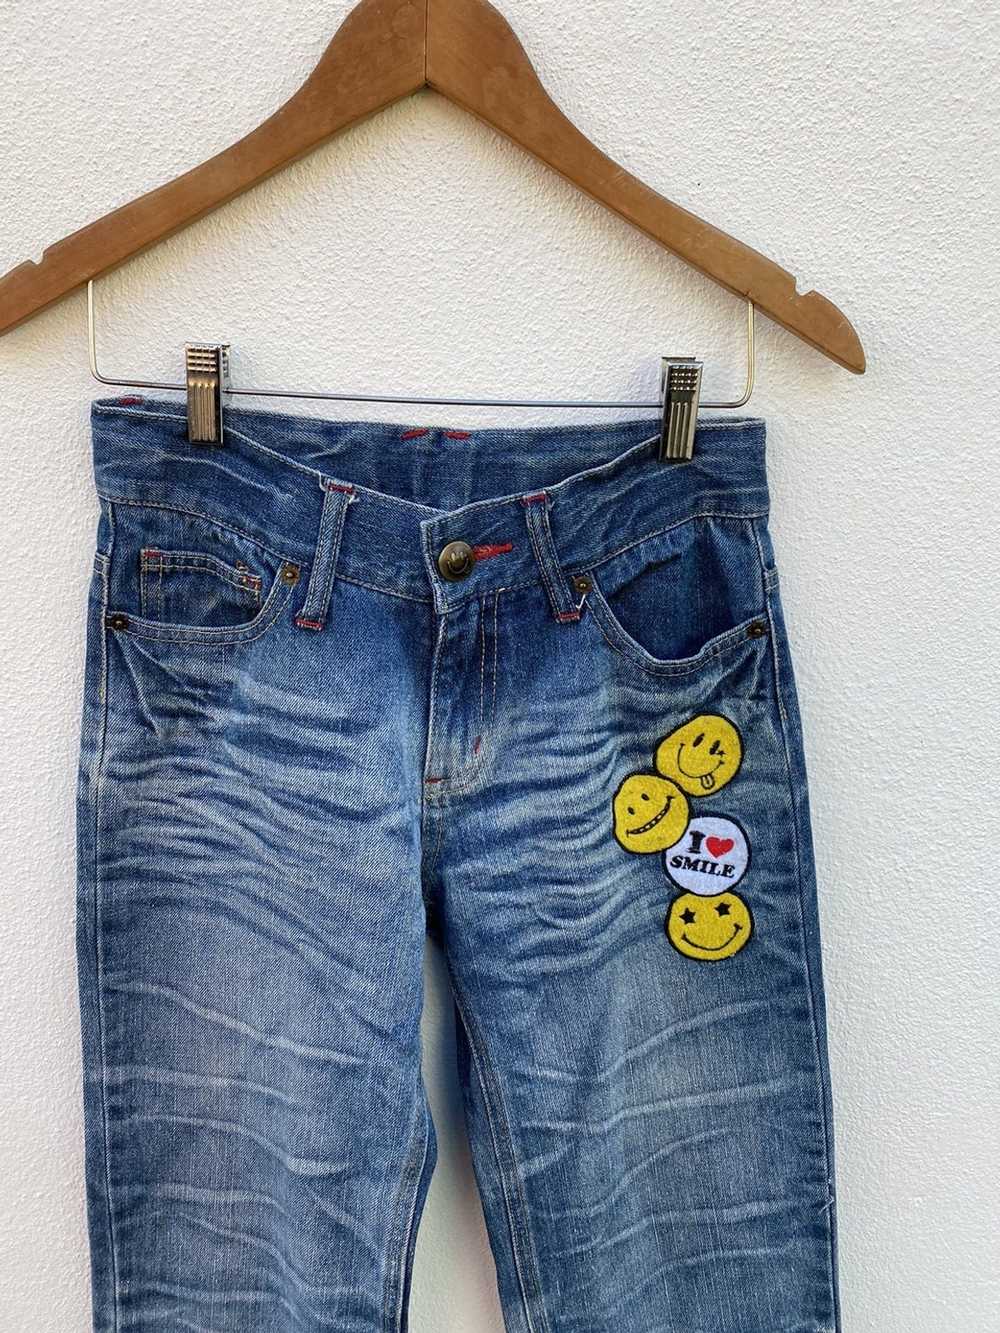 Japanese Brand Smiley Face Jeans - image 3